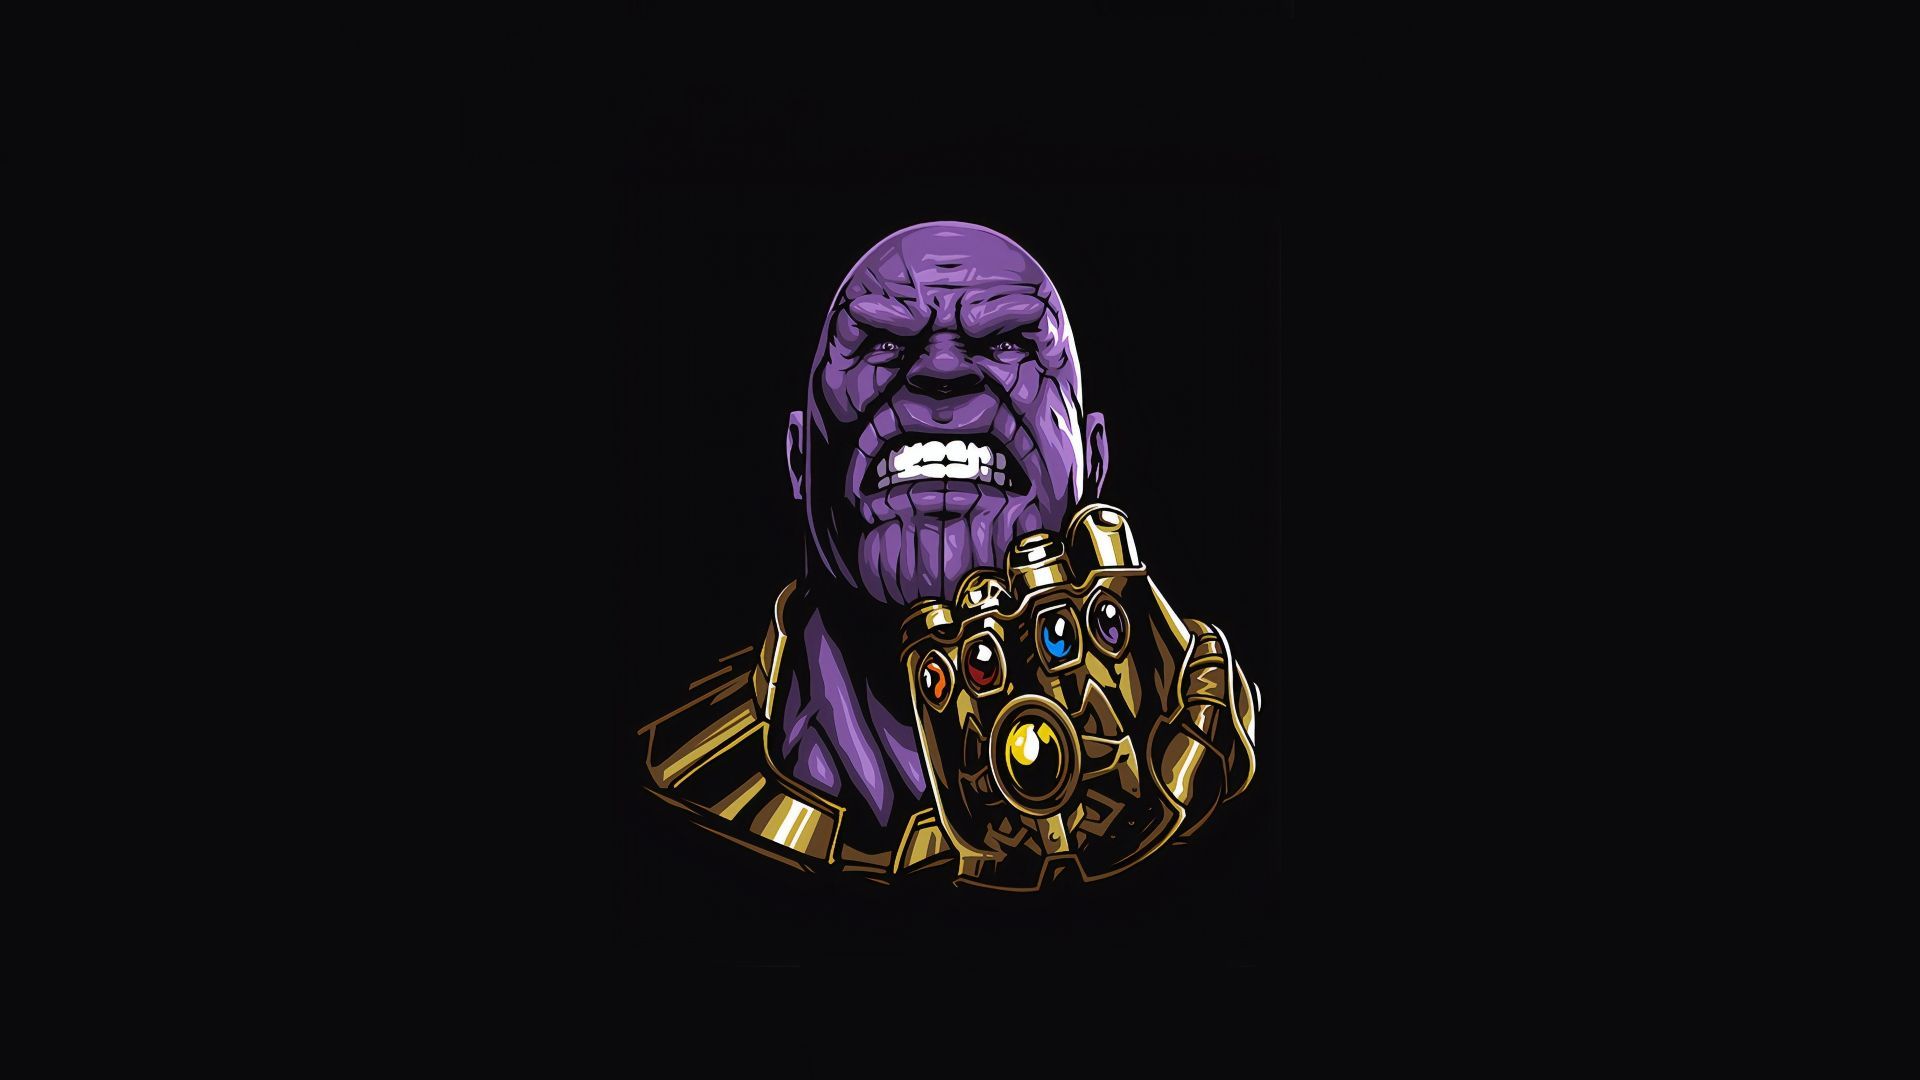 Desktop wallpaper thanos, angry man, minimal, art, HD image, picture, background, 73a372